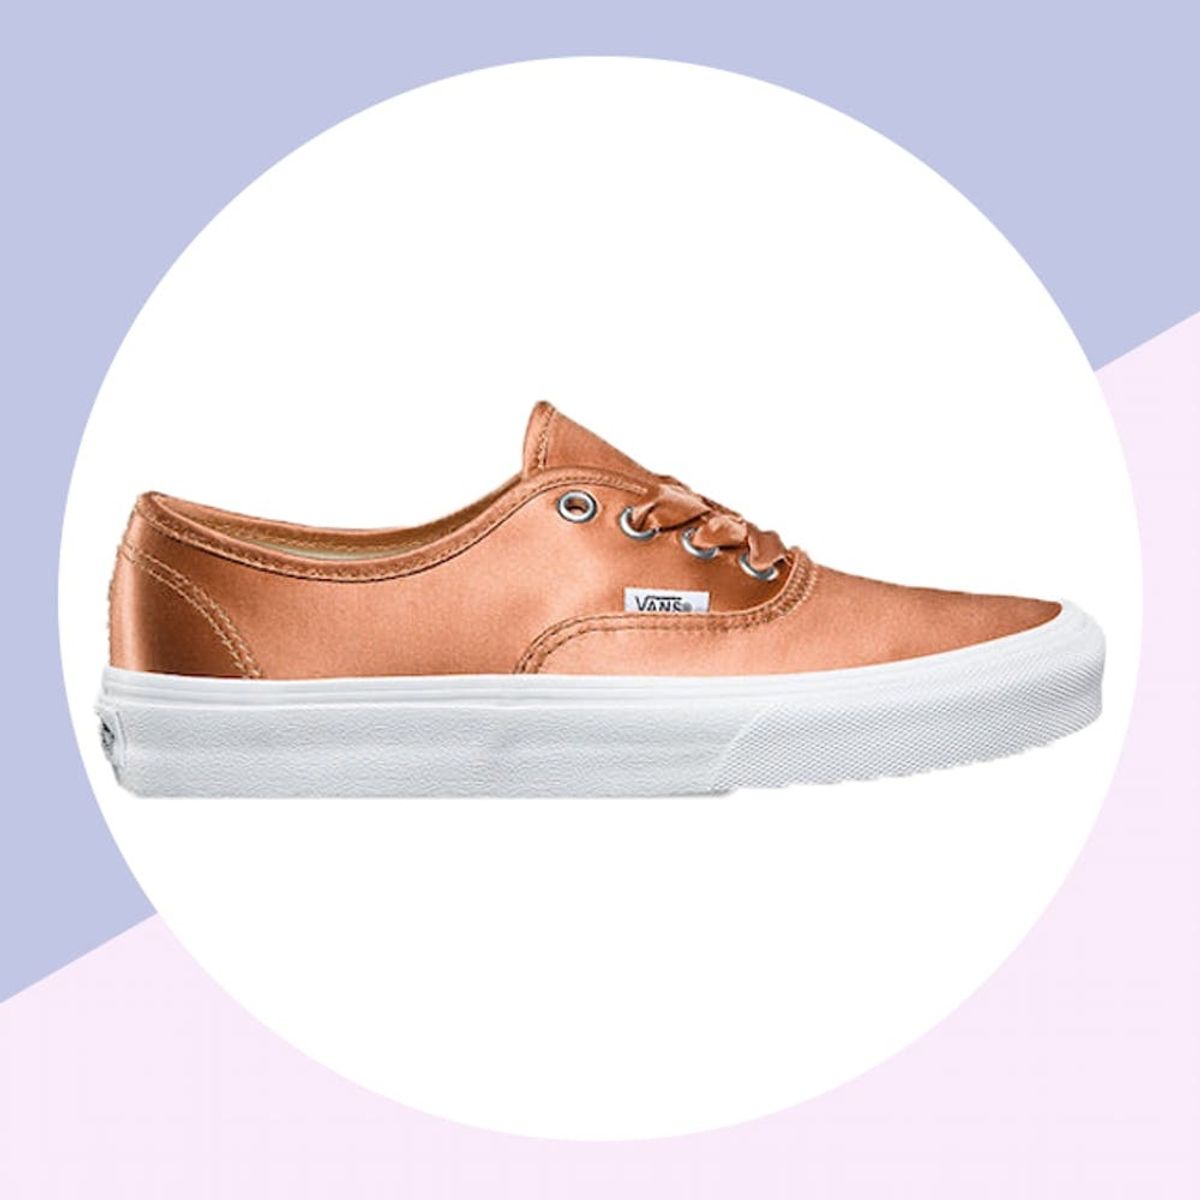 Vans Has Shiny Rose Gold Sneakers and We’re Freaking Out